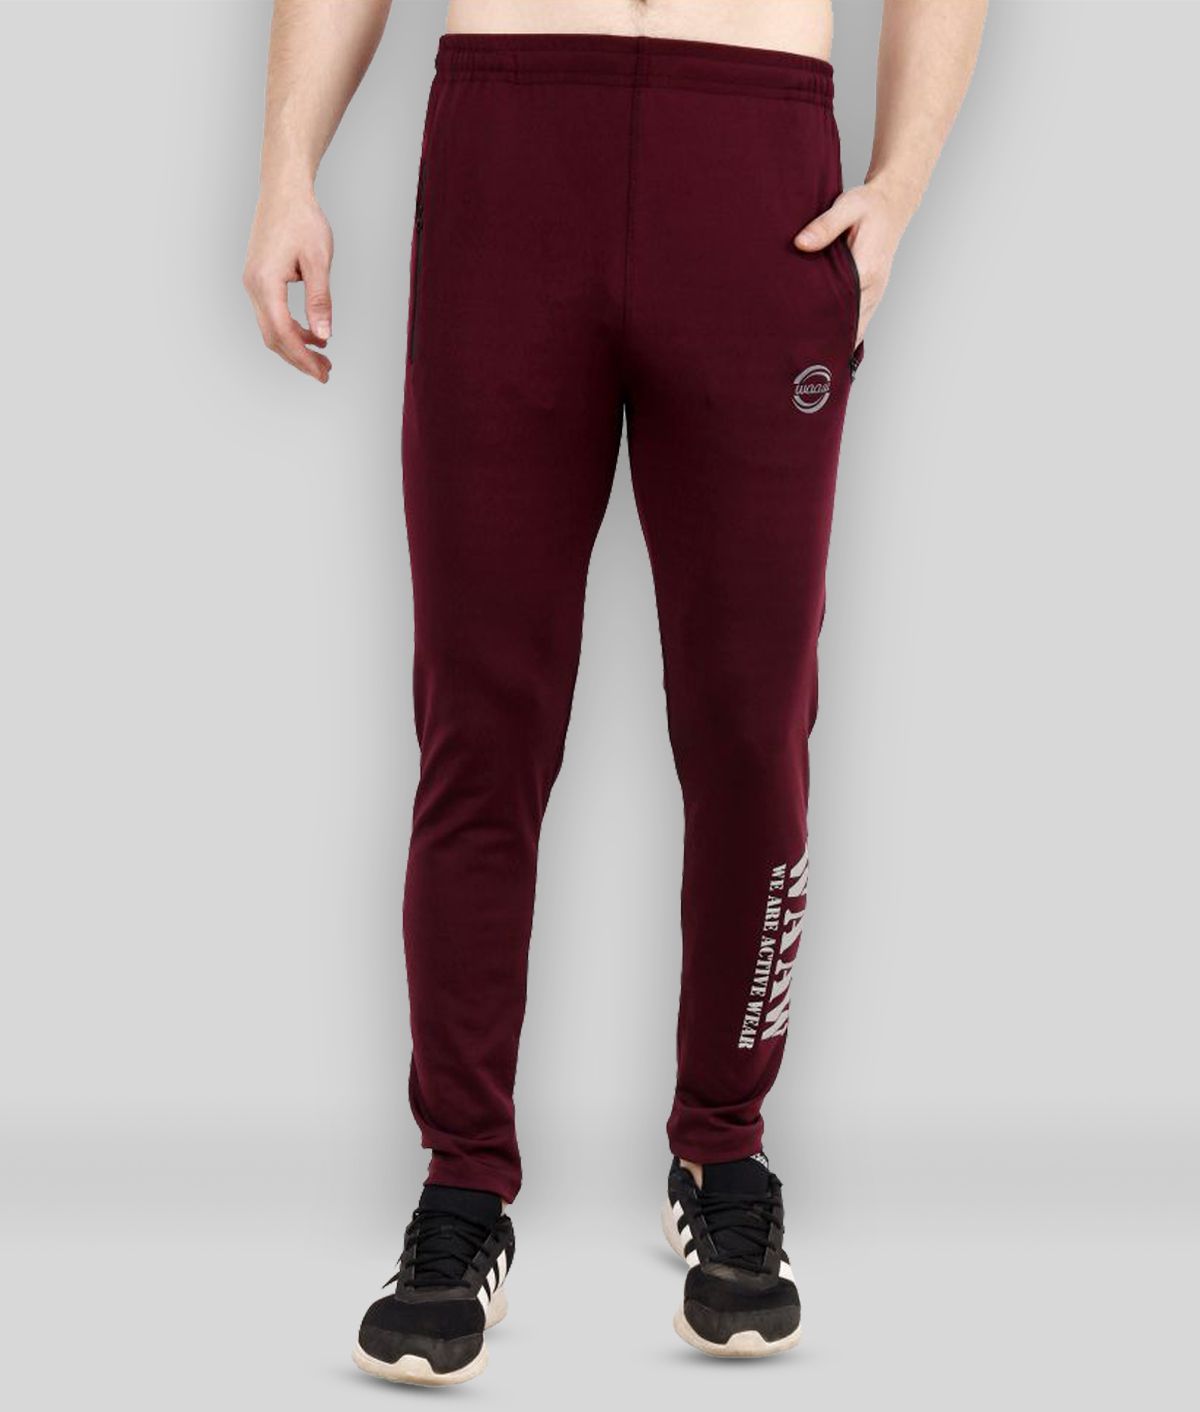 WAAW - Maroon Polyester Men's Trackpants ( Pack of 1 )